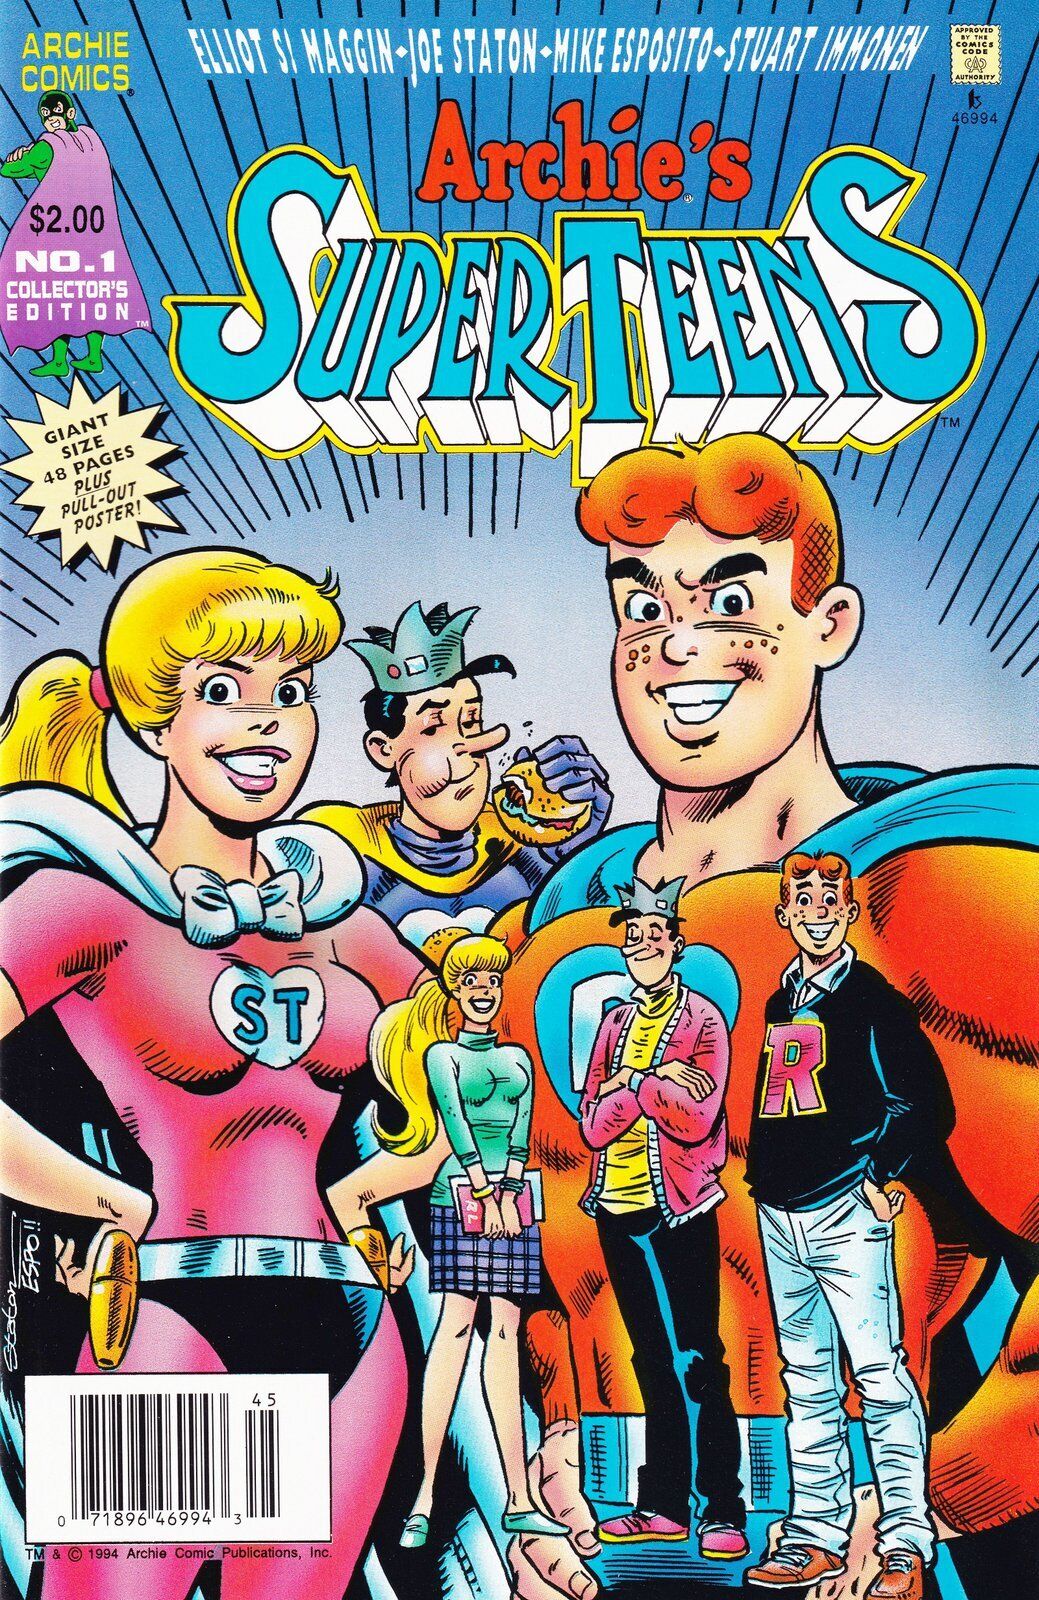 Archie\'s Super Teens #1 Newsstand Cover (1994-1996) Archie Comics